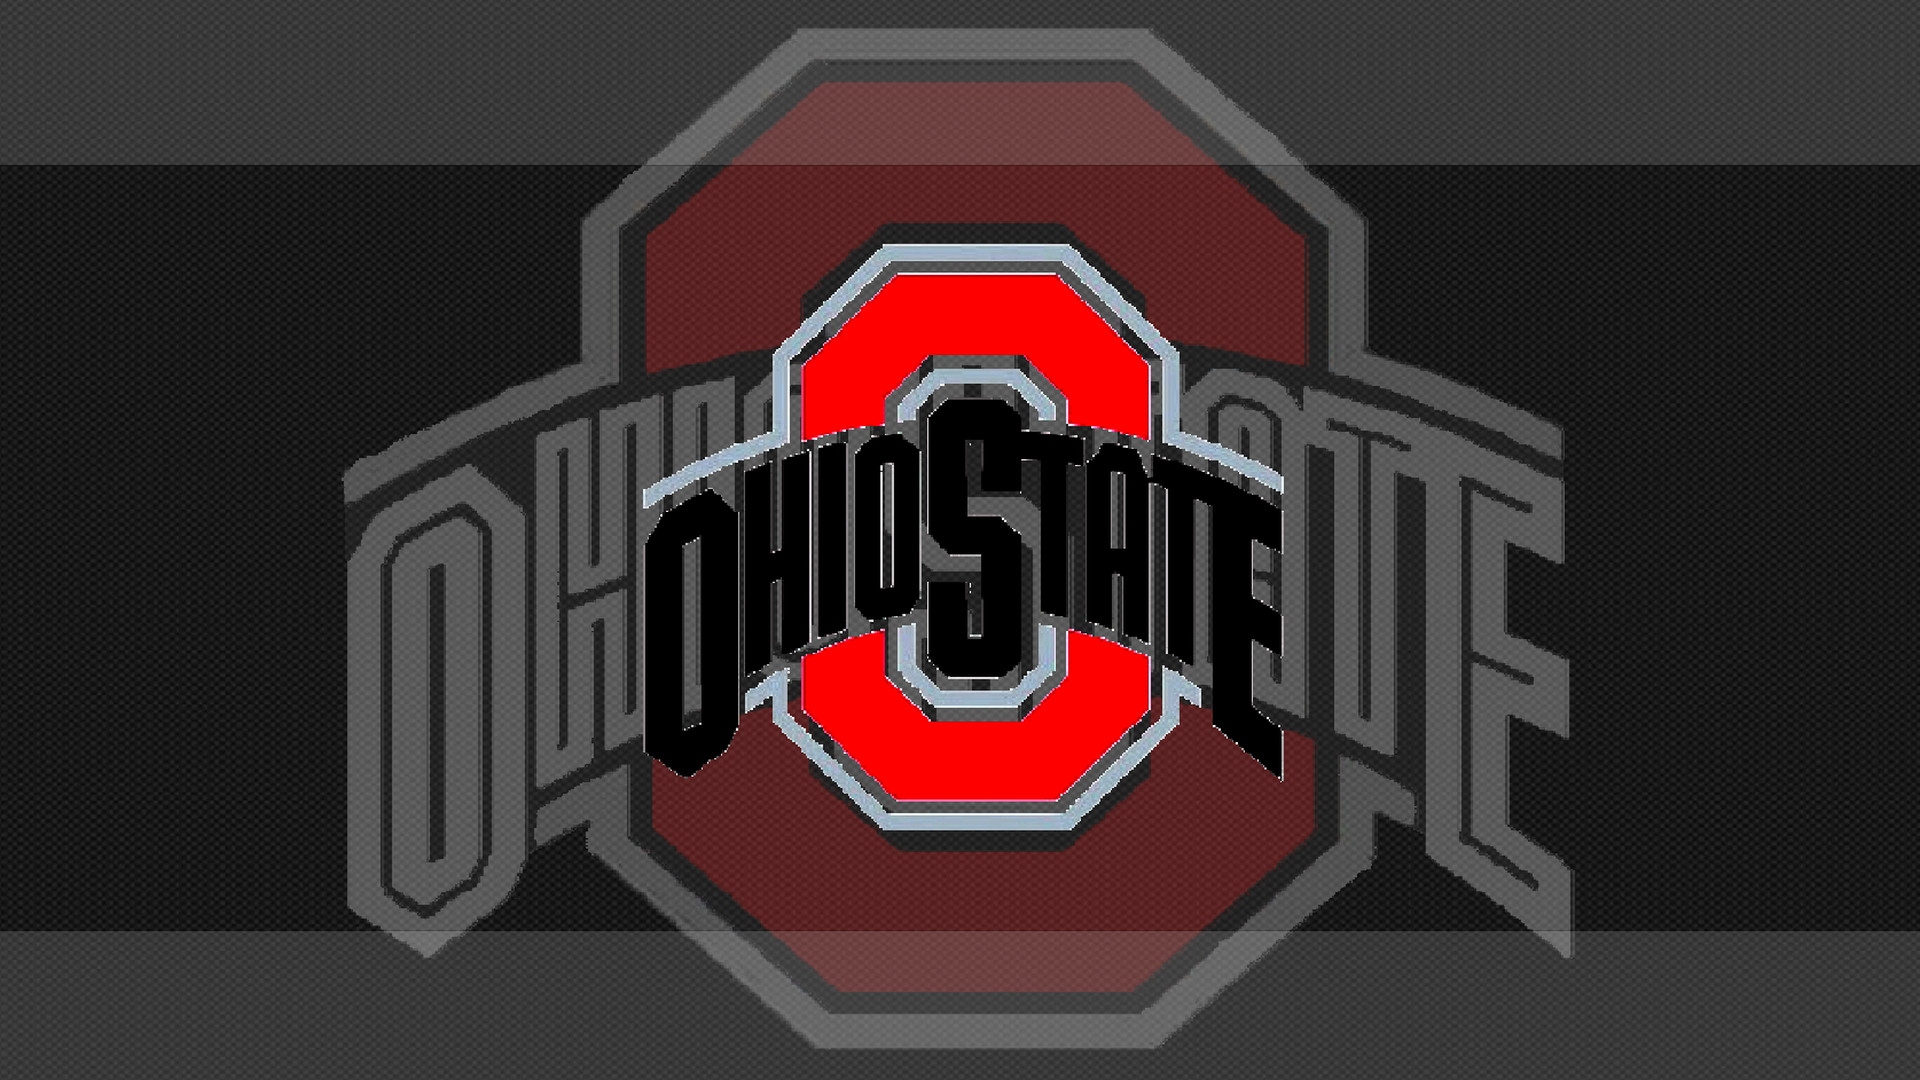 1920x1080 Ohio State Buckeyes images ATHLETIC LOGO #7 HD wallpaper and background  photos